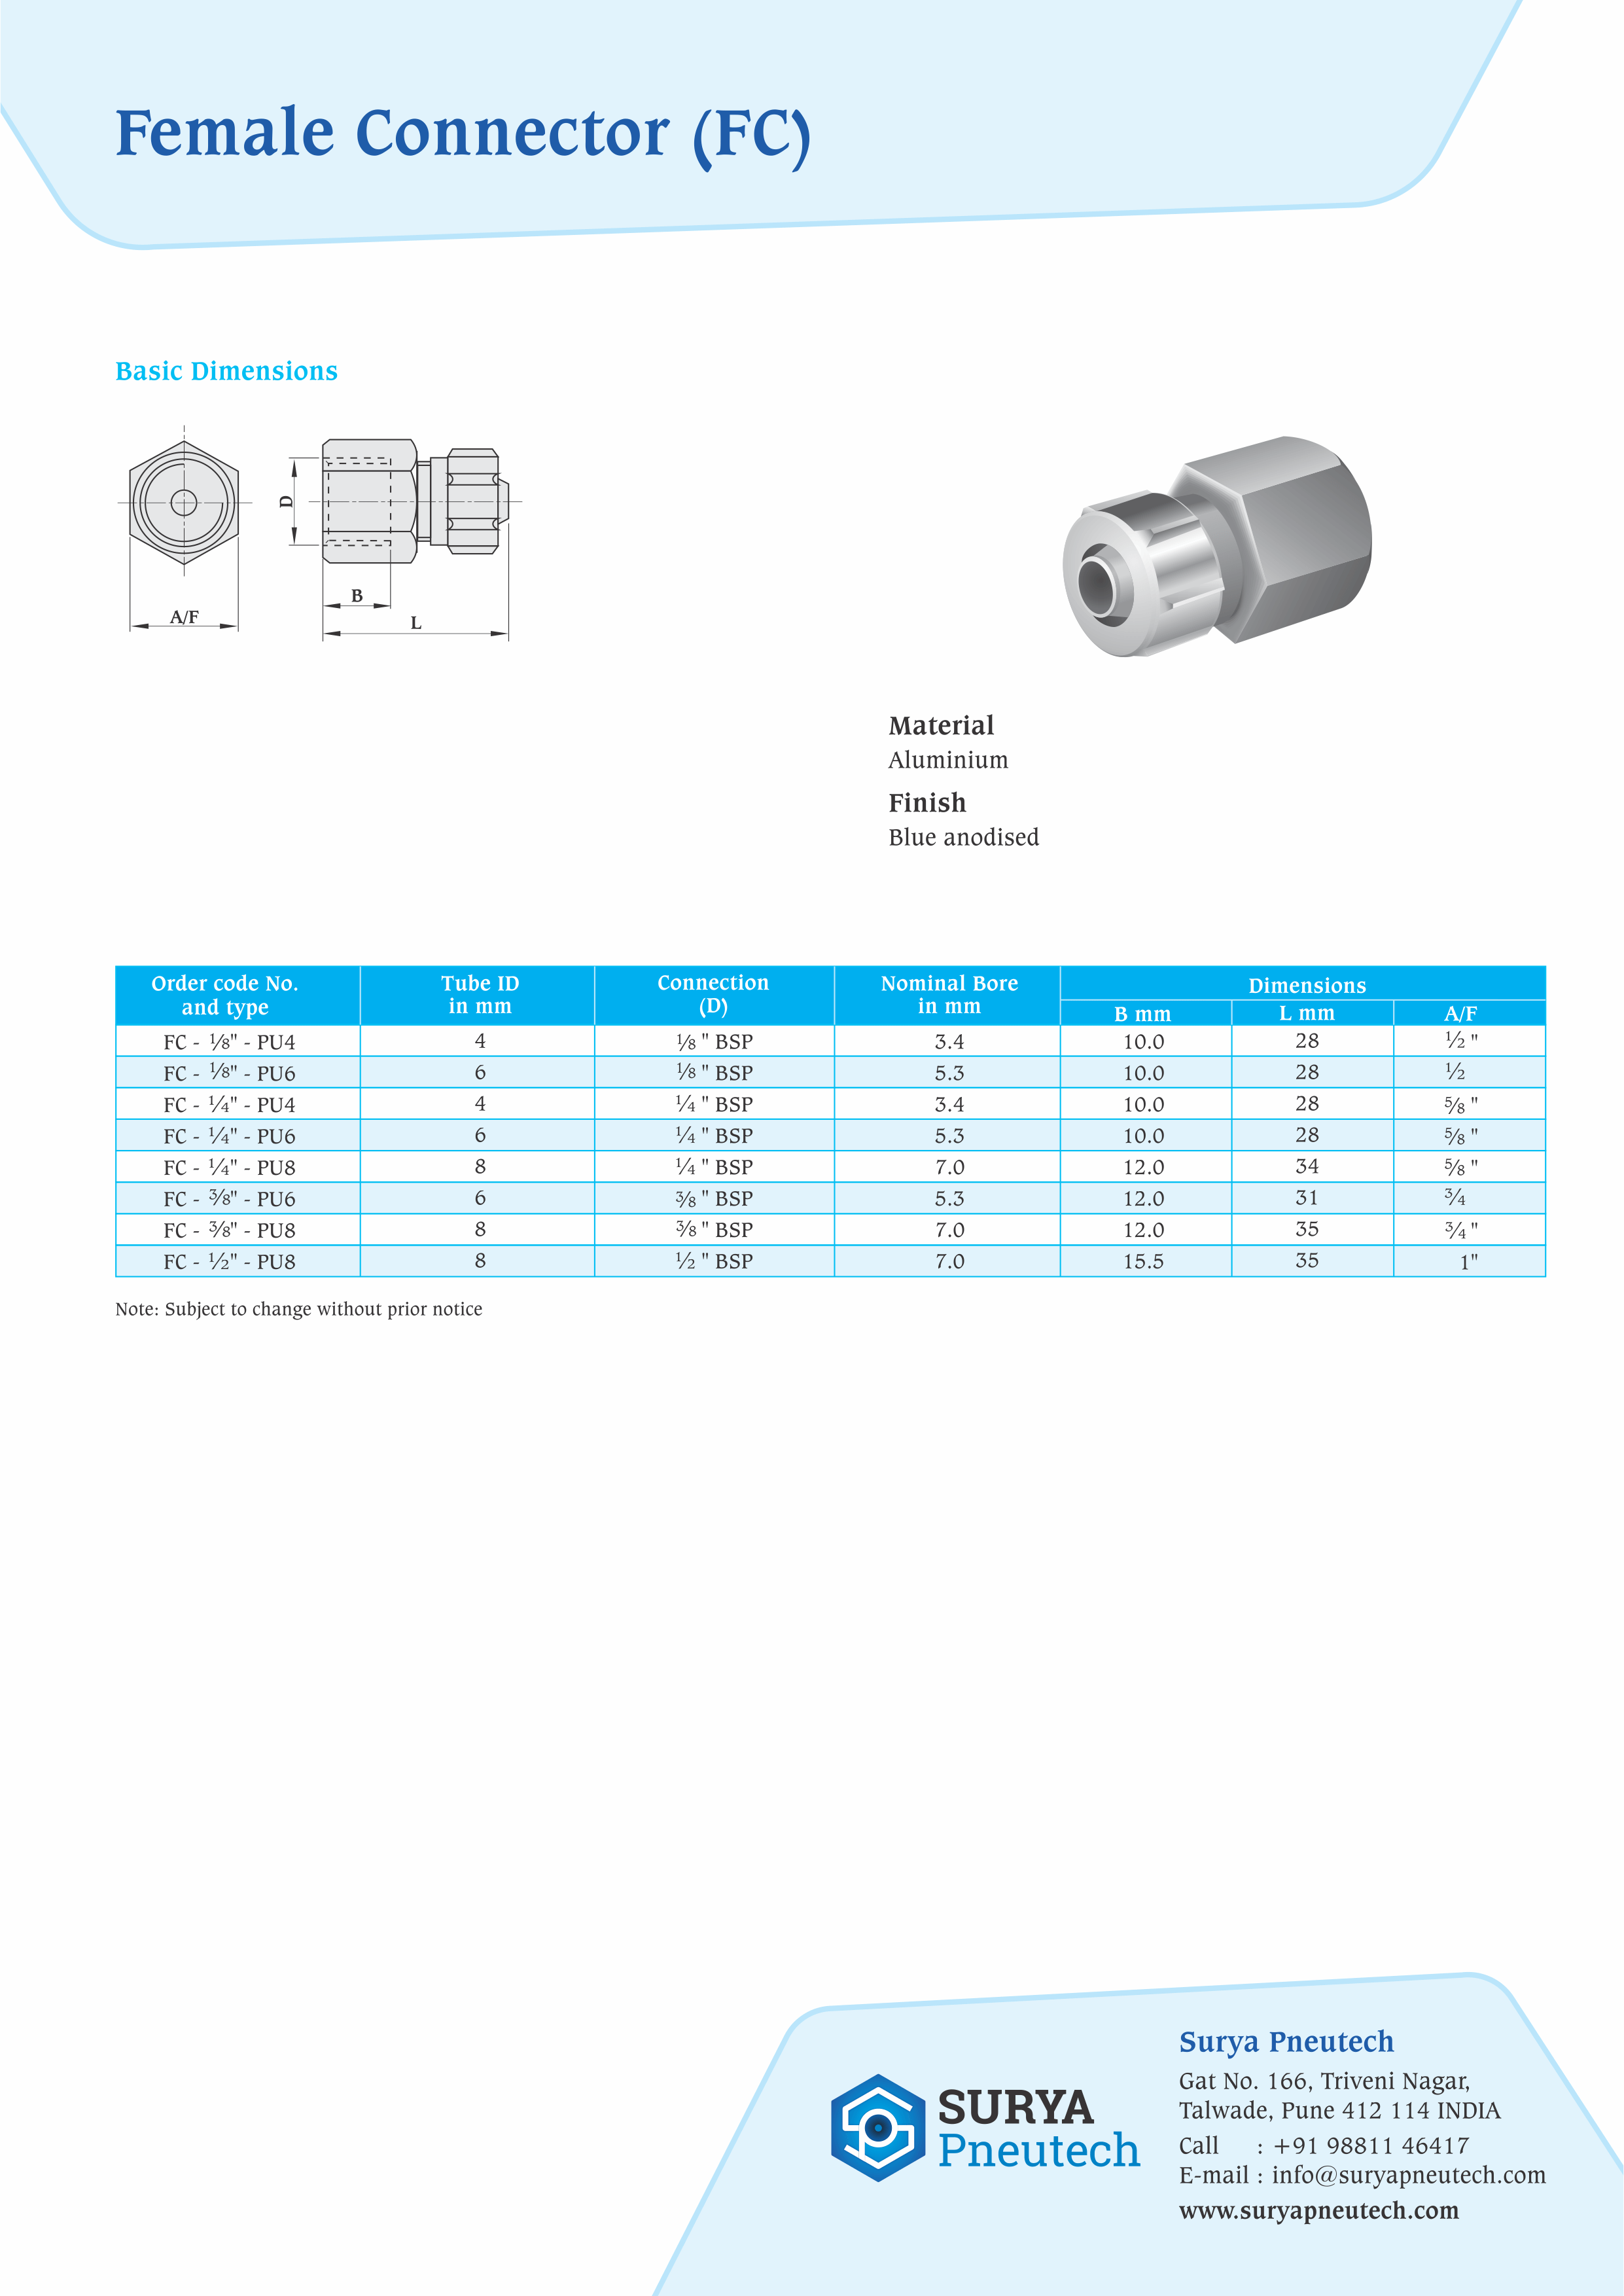 Female Connector manufacturer in India